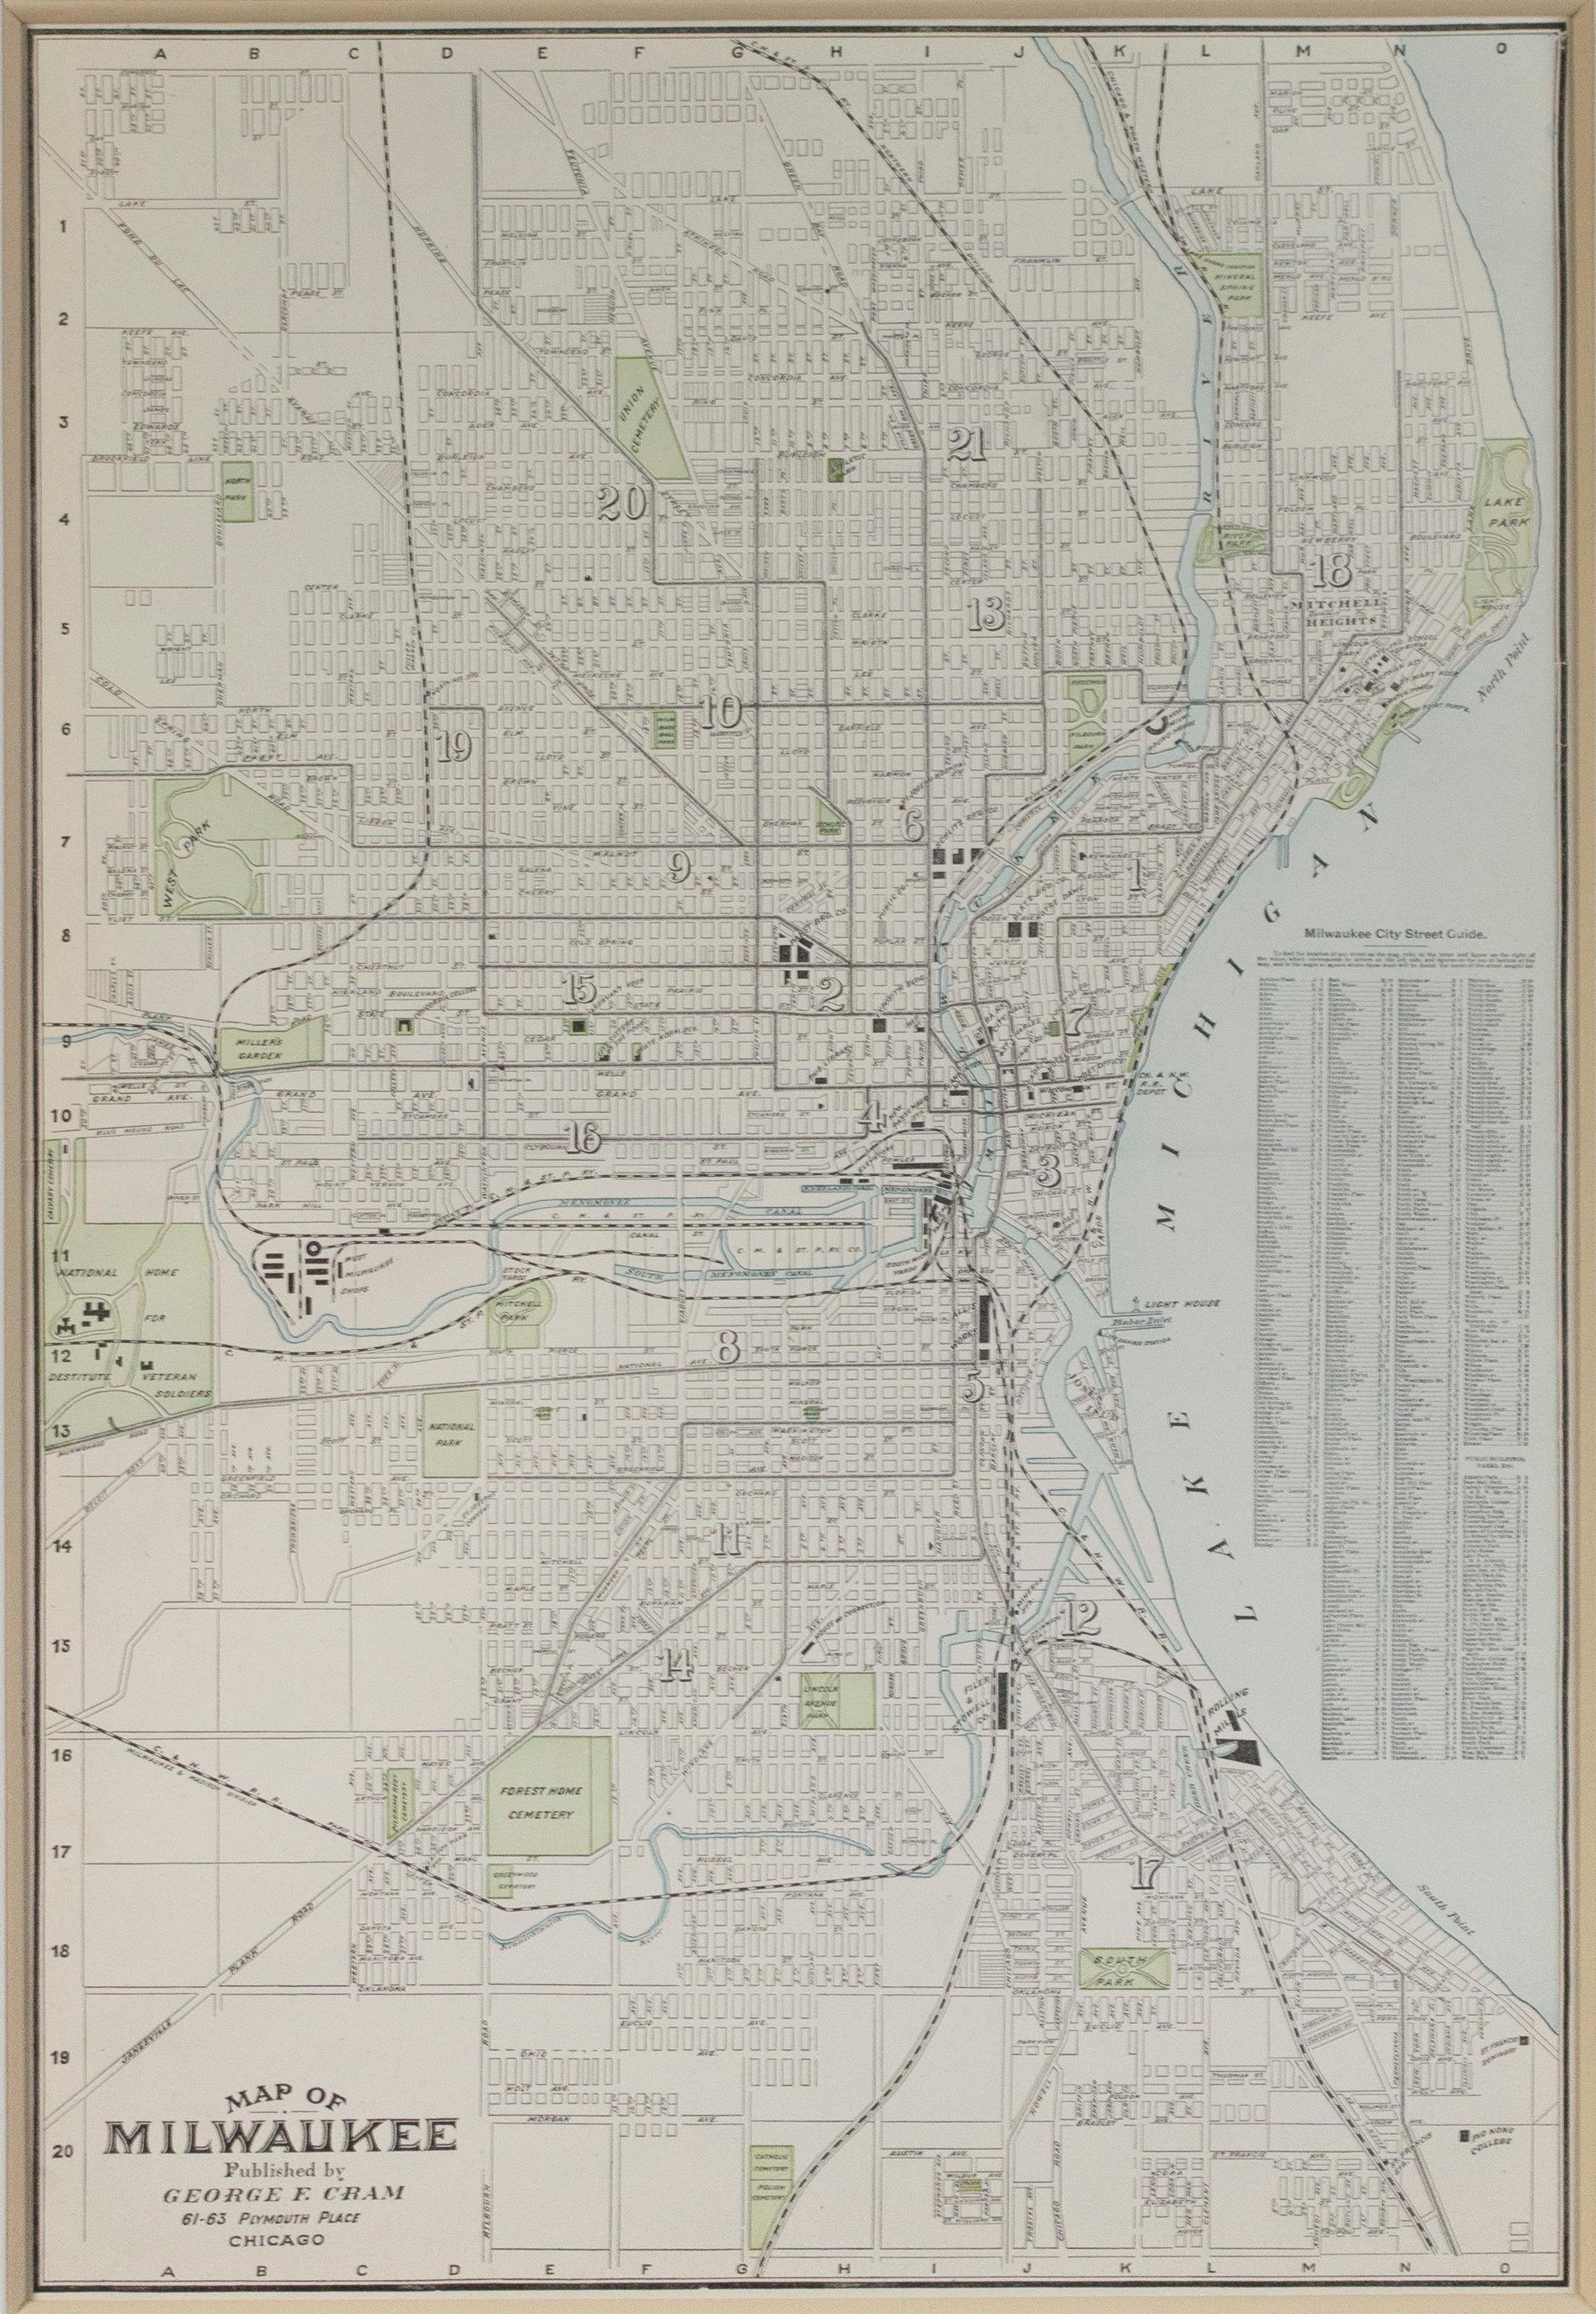 'Map of Milwaukee' color lithograph published by George F. Cram of Chicago - Print by George Franklin Cram